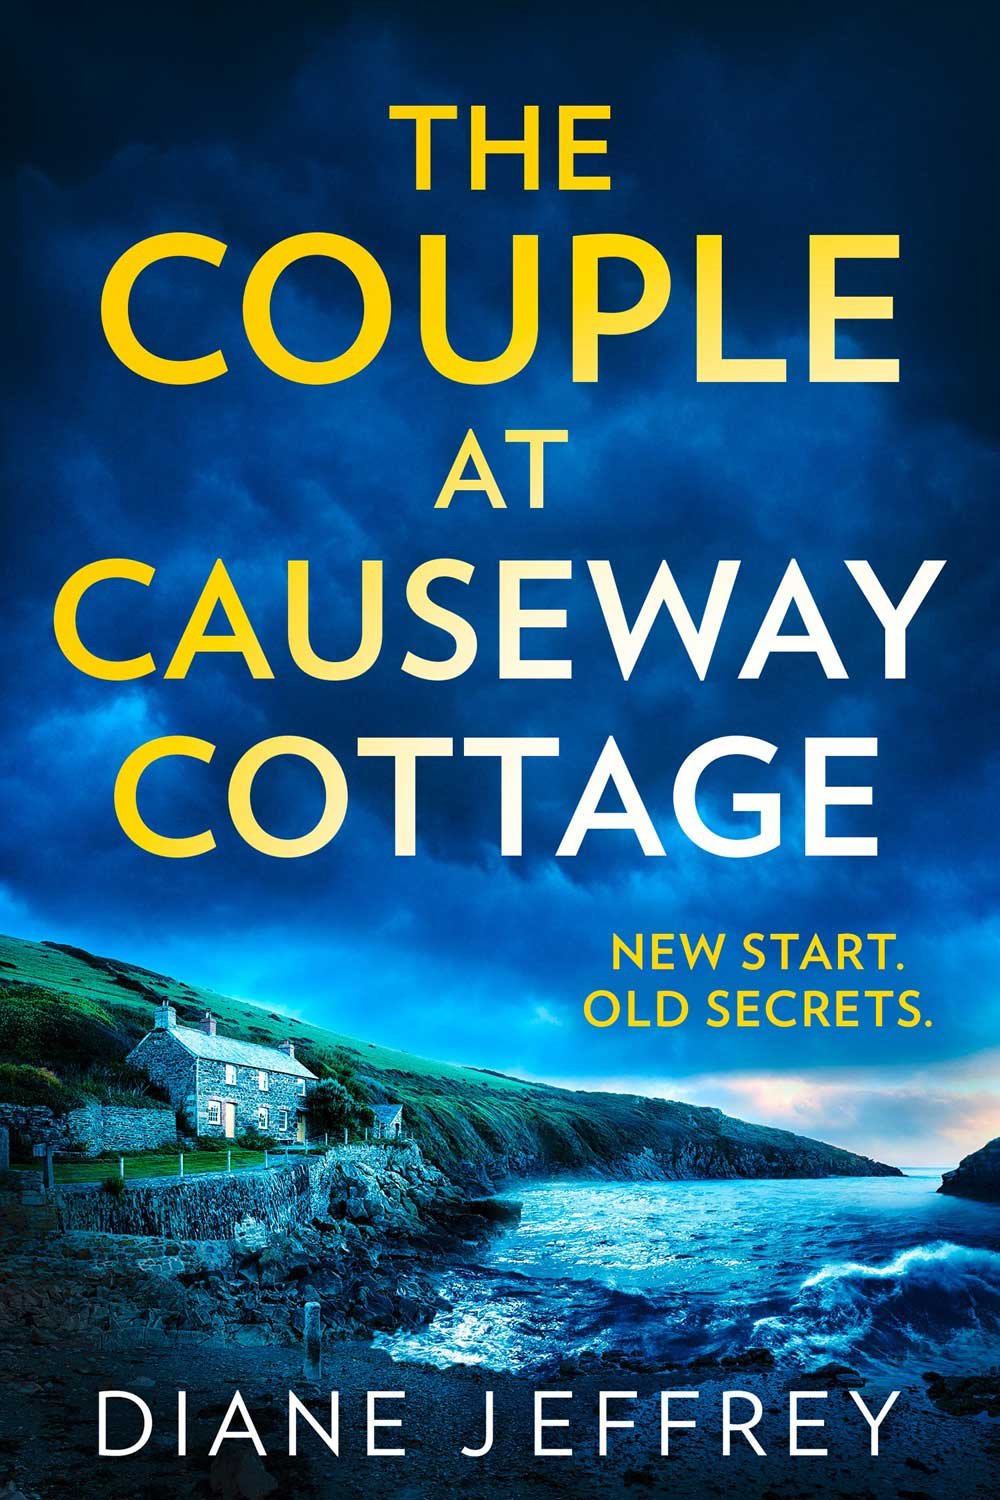 The-Couple-At-Causeway-Cottage-web.jpg